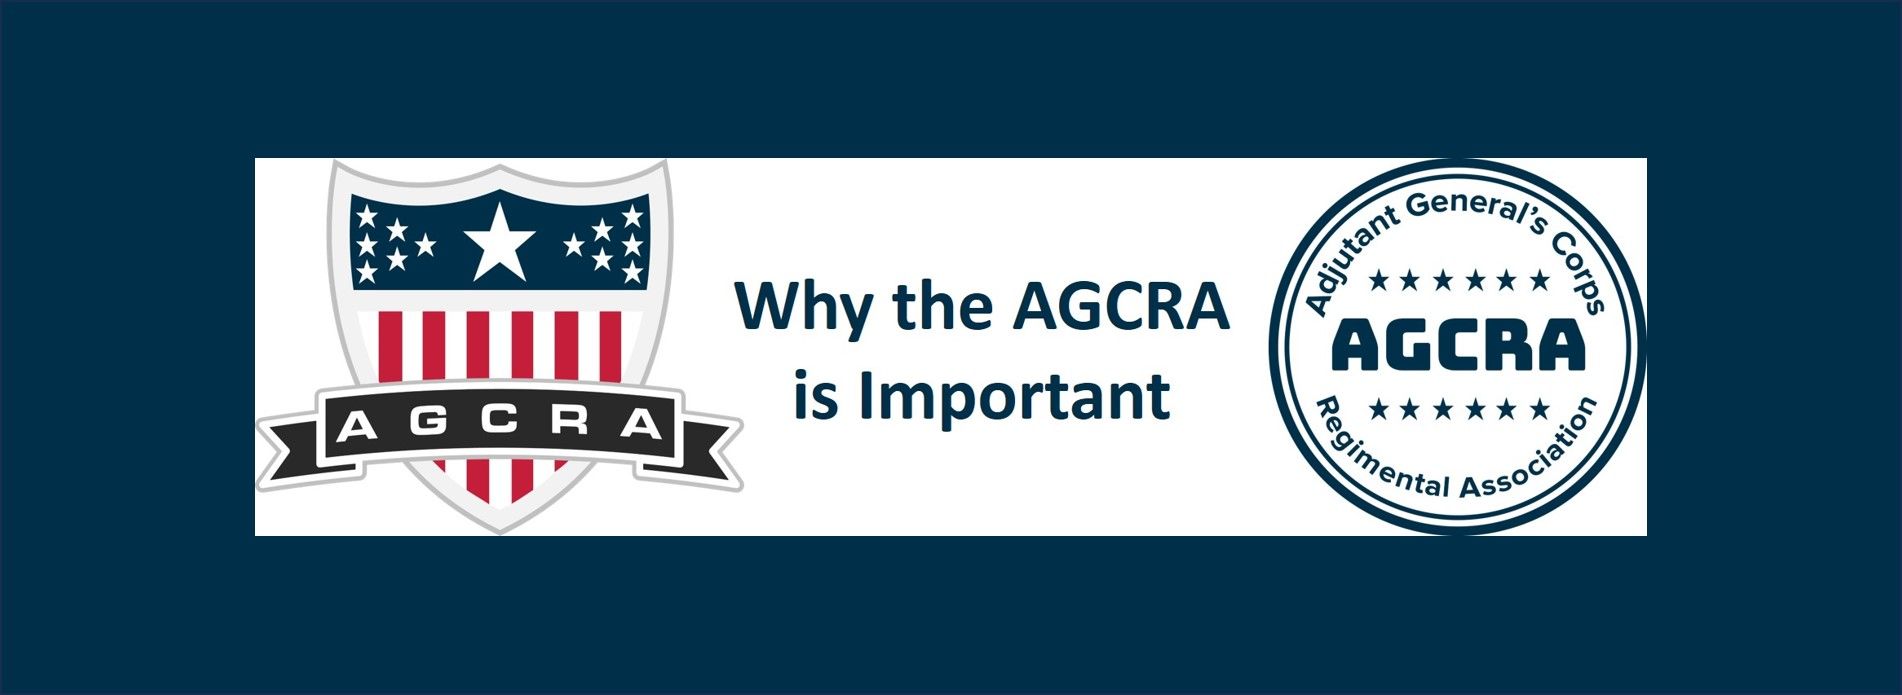 Why the AGCRA is Important